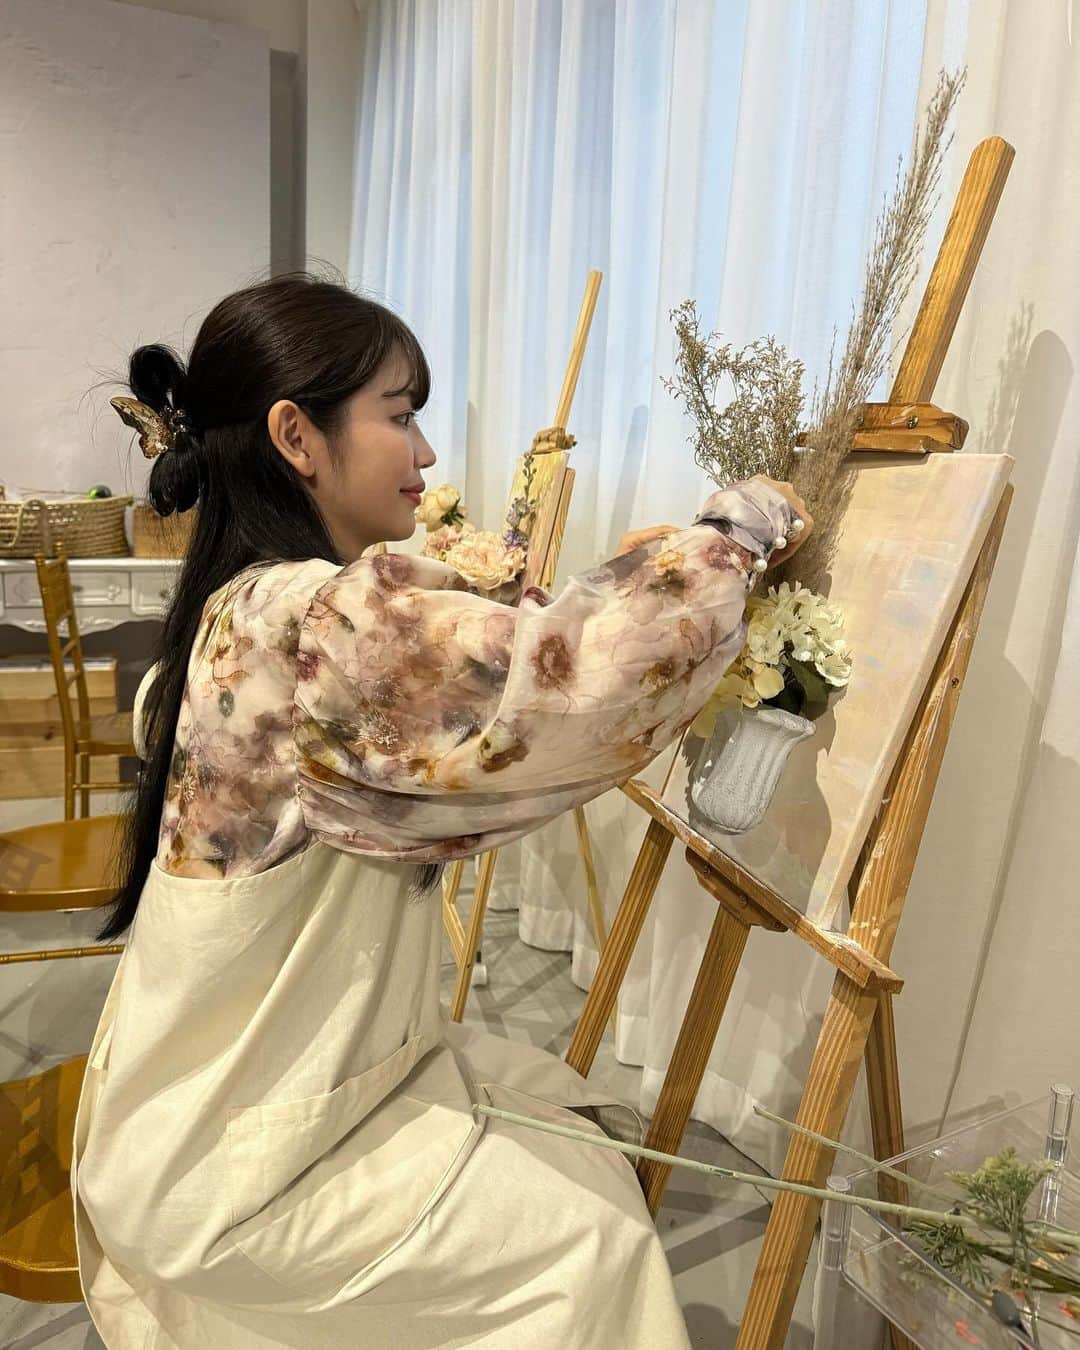 MICさんのインスタグラム写真 - (MICInstagram)「I went to a very fun lesson 💐  Art Workshop🎨 at @wearefacademy  A place where I can express myself as I wish while calming my mind 🌸 This time, I experienced Korean style 3D Floral Canvas Art 🐰  The workshop takes about 2.5~3 hours and consists of 3 parts 💕  ◆Part 1 ◆ Painting the canvas: Paint freely on the canvas board with a brush using a variety of techniques 🖼️  ◆Part 2 ◆ Handling different flowers: Participants learned how to handle different types of flowers such as silk flowers, dried flowers, and preserved flowers, and how to properly care for them🌹  ◆Part 3 ◆ Floral design: A three-dimensional vase was placed on top of the artwork from Part 1 to create a floral arrangement.  We chose our favorite flowers from among many flowers and put them in the vase💕 While asking the teacher for tips on how to create beautiful three-dimensional art 💐  And then it's done ✨✨  "Is this really our work?😳✨"  We were so excited to see how well it turned out 🌷 I was able to take home the work I made that day! I'm displaying mine at home 💐  The teacher was really, really kind. She carefully taught me what I didn't know. I enjoyed it even though I'm a beginner. And she was so energetic with a smile on her face that was really inspiring💕  @wearefacademy not only does Flower Workshop, but they also do bouquet orders and wedding venue design 👸  If you're interested, check out their account 💕  先日とってもたのしい習い事へ💐  @wearefacademy で開催される Art Workshop🎨  心を落ち着かせながら自分が思うままに表現できる場所🌸 今回は韓国式の3D Floral Canvas Artを体験してきました🐰  ワークショップの所要時間は約2時間半～3時間で、3つのパートで構成されているよ💕  ◆Part 1  様々な技法を使って自由に筆を使い、キャンバスボードにペイント🖼️ 皆さんもそれぞれ個性が出てて他の方のを見るのも楽しい💕  ◆Part 2  シルクフラワー、ドライフラワー、プリザーブドフラワーなど、さまざまな種類の花の扱い方、適切なお手入れ方法を実際に体験しました🌹  ◆Part 3  描いたアートの上に立体的な花瓶を置いて沢山のお花の中から好きなお花を選んで先生にコツを伺いながら挿していくよ💐  そして完成〜✨\( ˙▿˙　)/✨  「これ私たちの作品?!」ってあまりの出来栄えに大盛り上がり🌷 作った作品はその日に持ち帰れる！ わたしもお家に飾ってるよ💐  先生が本当に優しくて わからないところも丁寧に教えてくれたから初心者でも楽しめたよ👸 とっても笑顔でエネルギッシュな方でめっちゃ元気をもらえた💕  @wearefacademy さんではFlower Workshopだけでなくブーケのオーダーや結婚式場のデザインも行っているそうです👸  興味のある方はアカウント見てみてね💕」10月29日 21時46分 - micmofmof